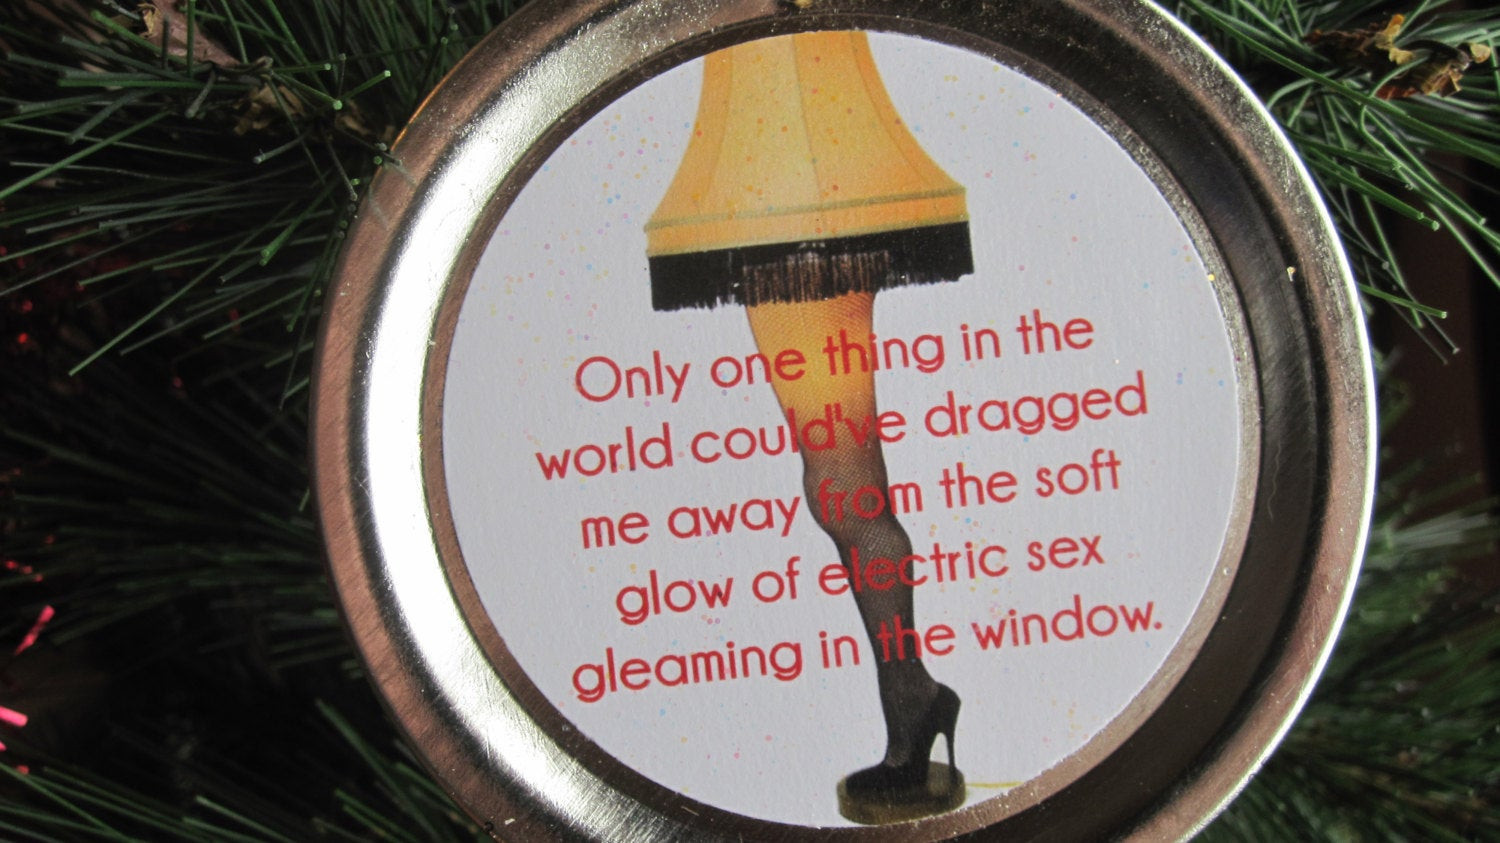 Leg Lamp Christmas Story Quotes
 A Christmas Story Ornament Funny Movie Quote by